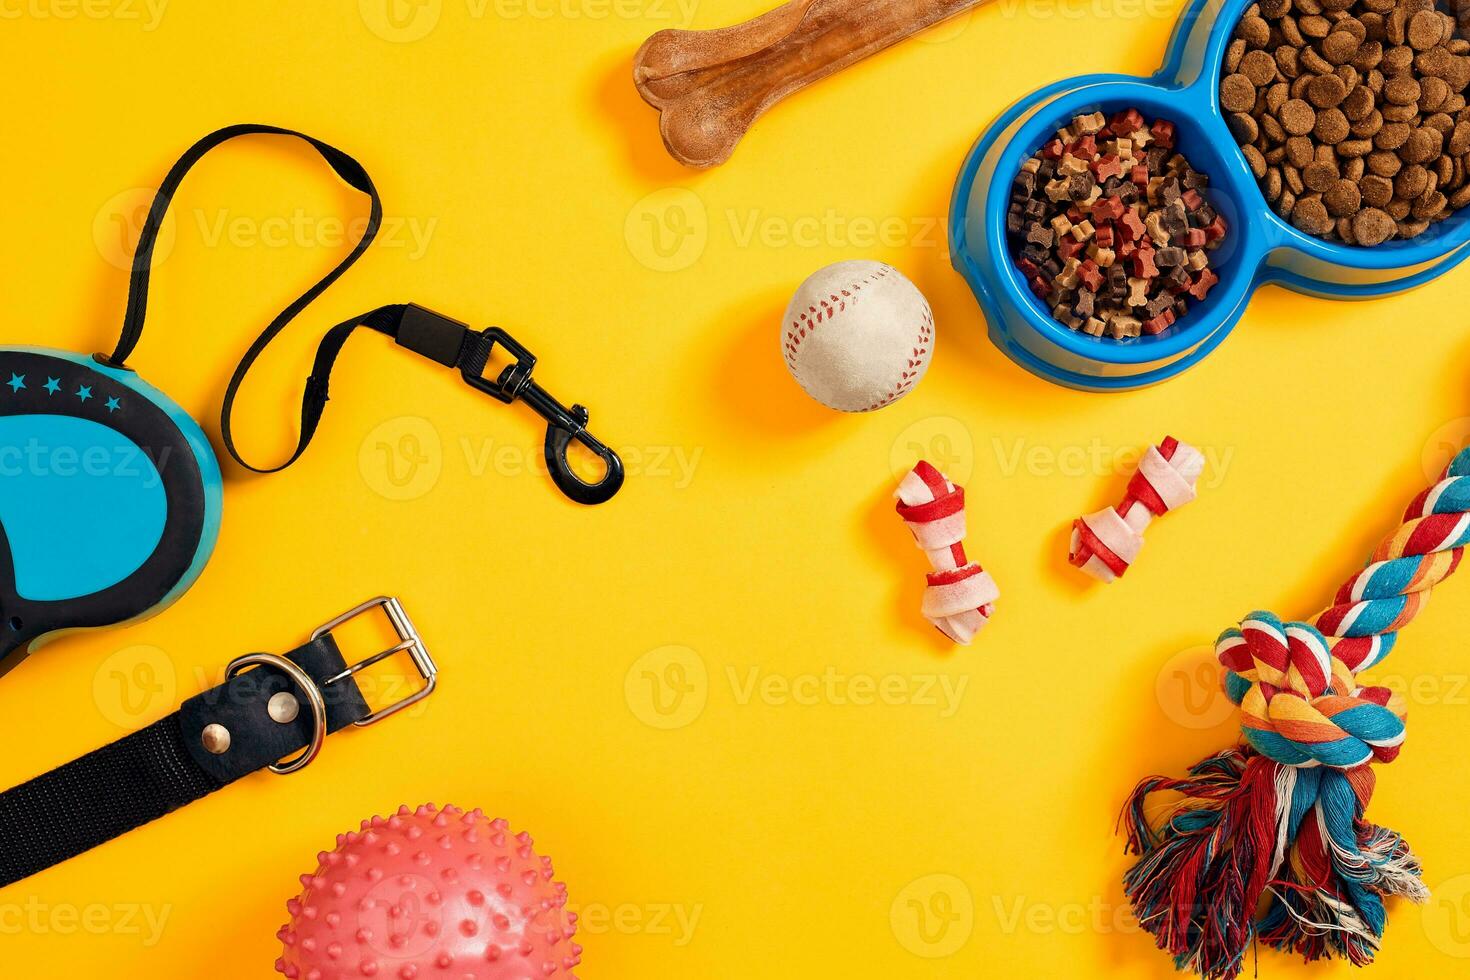 Dog accessories on yellow background. Top view. Pets and animals concept photo